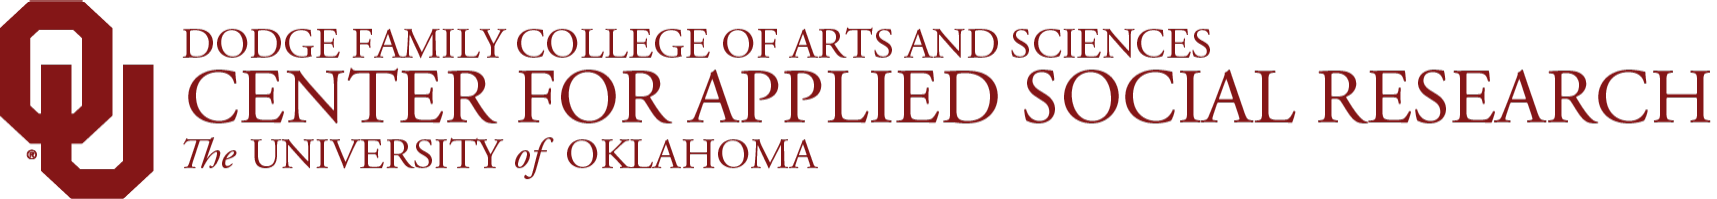 OU Dodge Family College of Arts and Sciences, Center for Applied Social Research, The University of Oklahoma wordmark